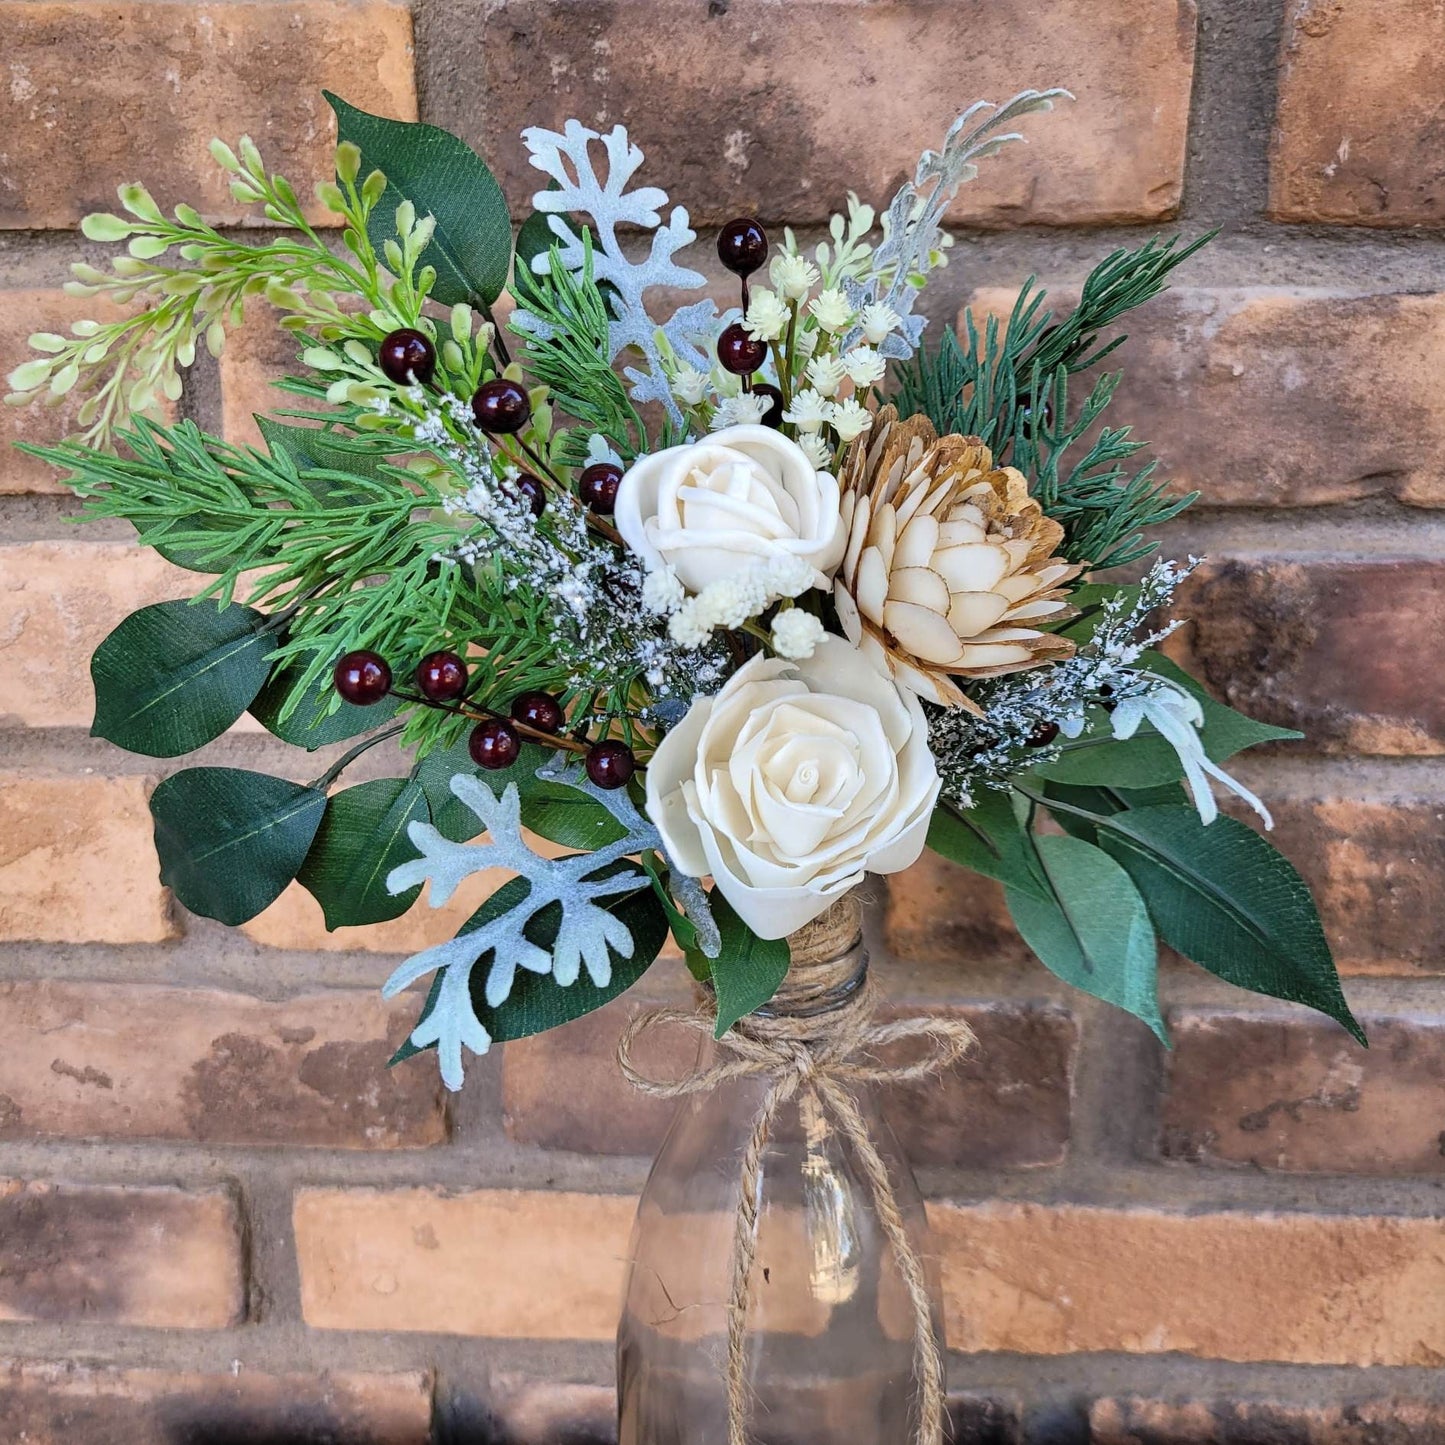 Christmas Wood Flower Arrangement, Christmas Table Centerpiece, Wood Flowers in Vase, Holiday Hostess Gift, Winter Florals